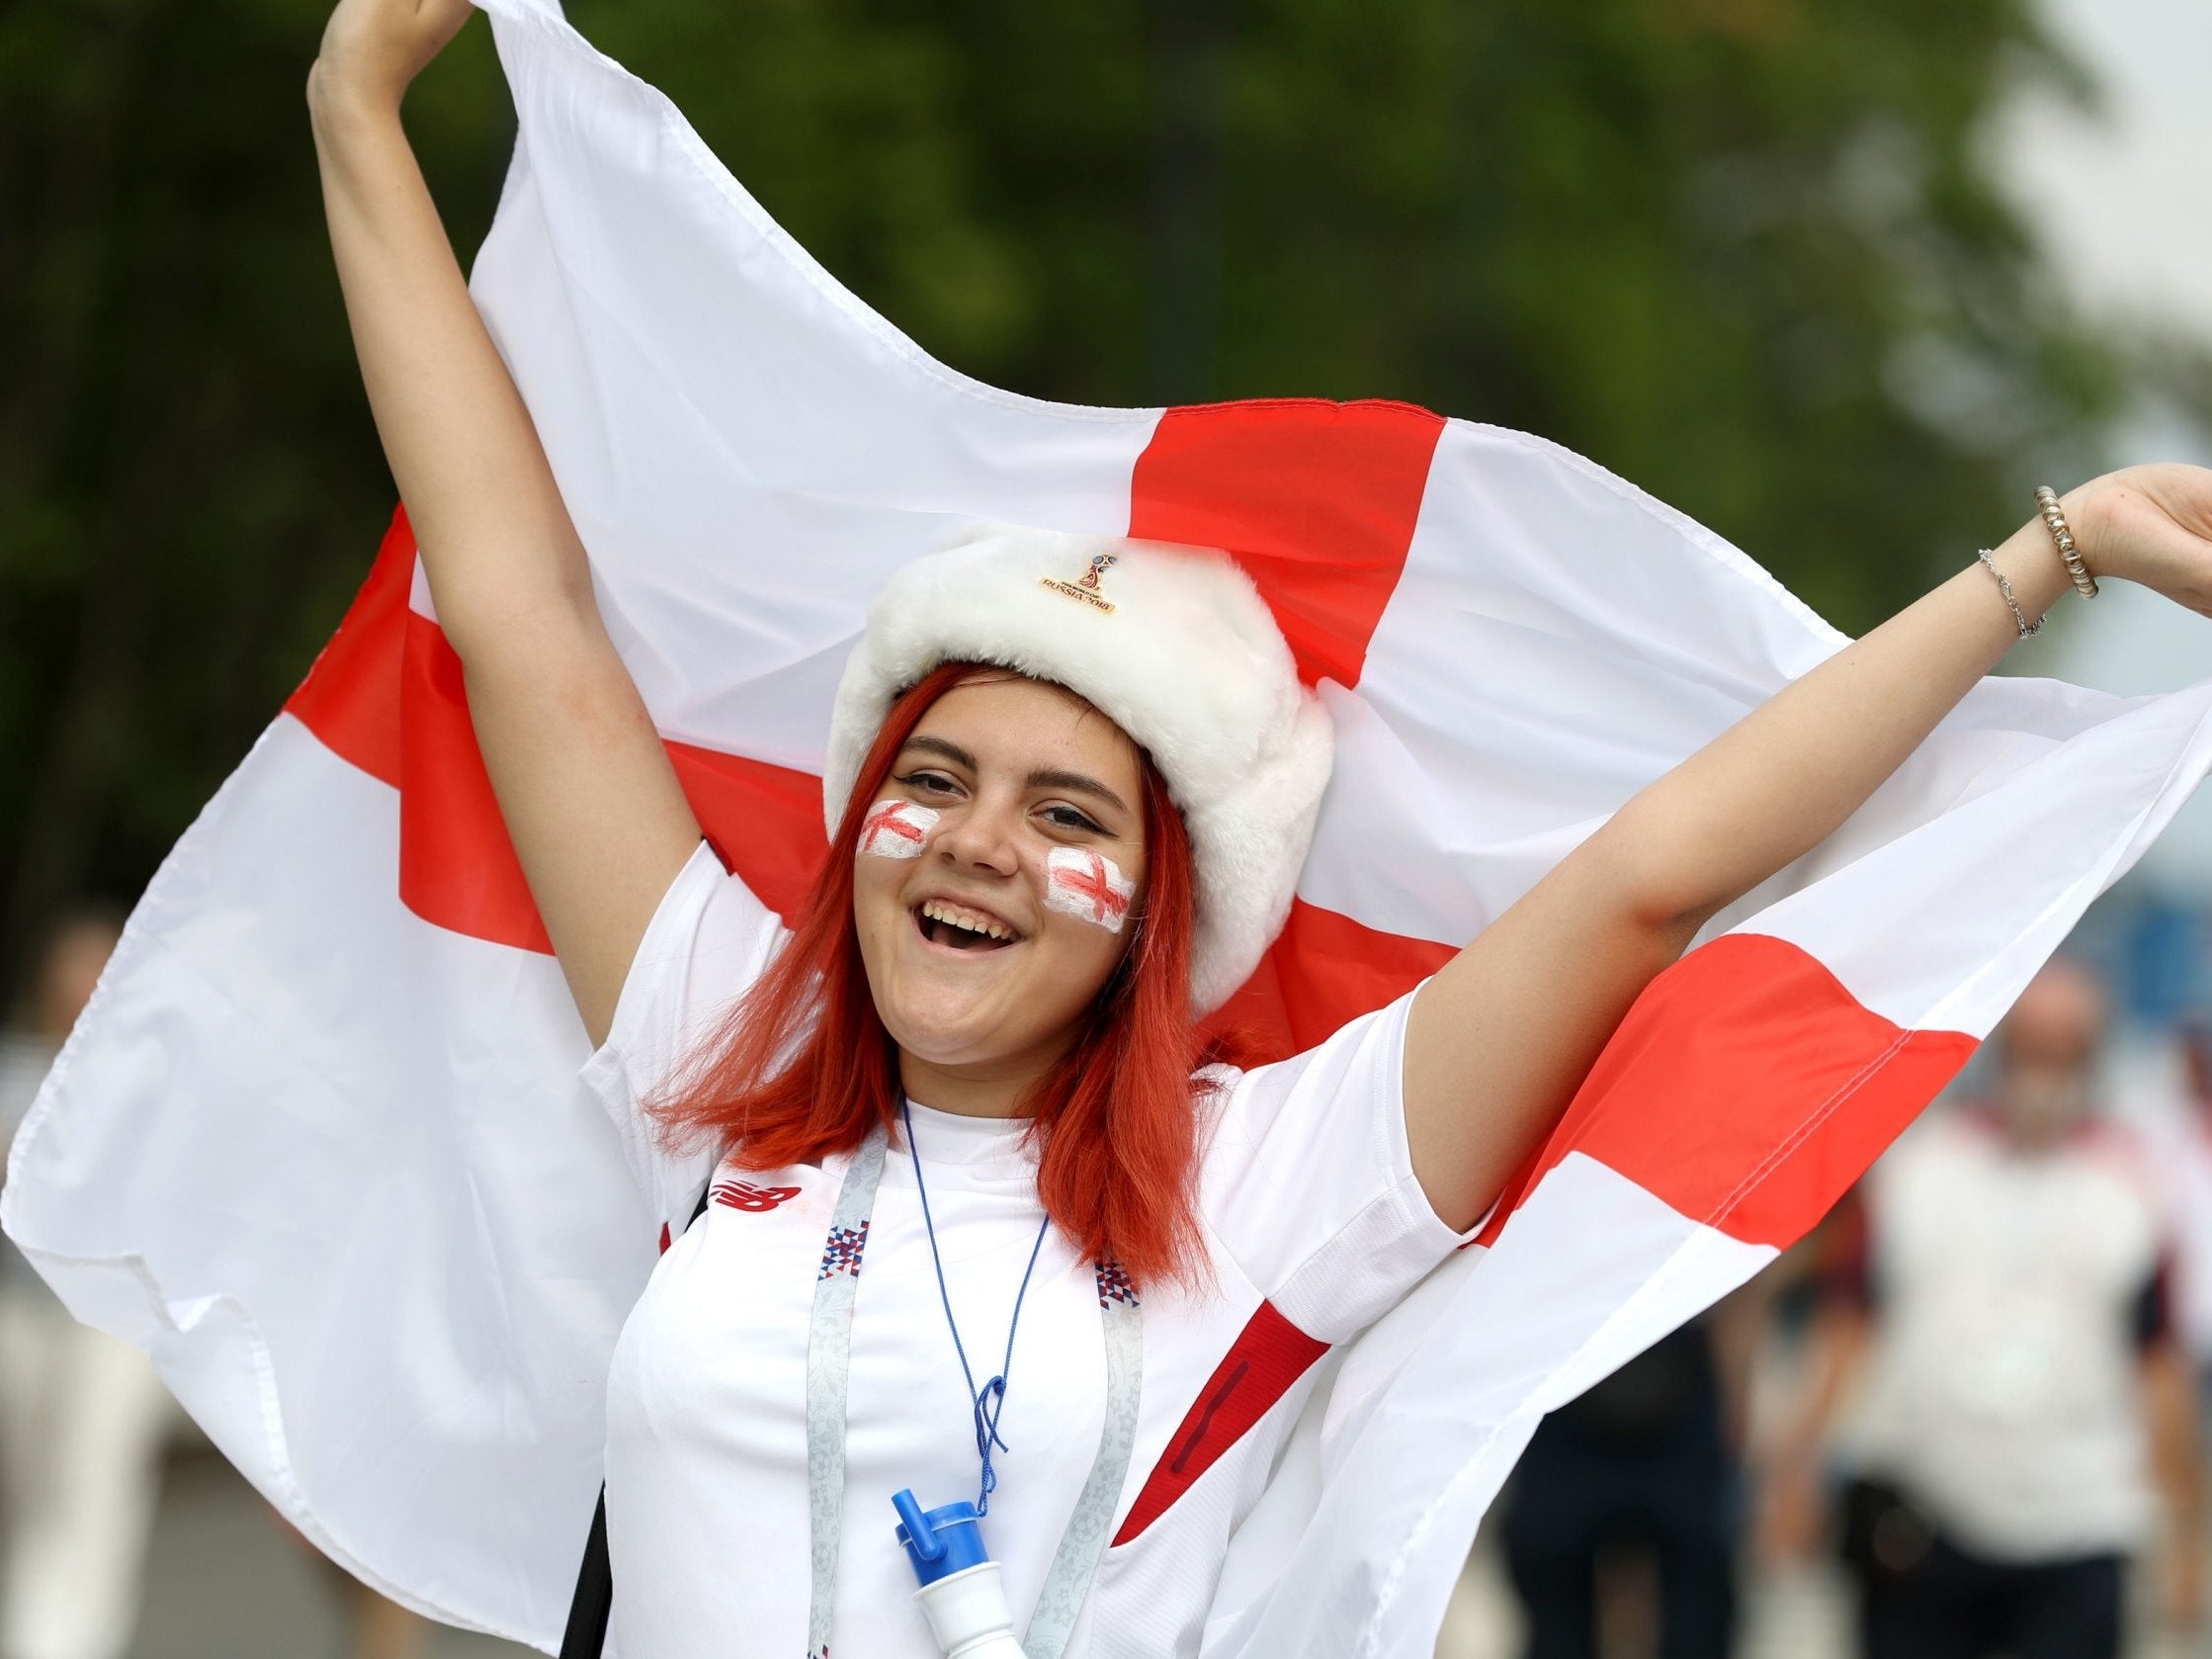 England vs Sweden LIVE World Cup 2018: Prediction, how to watch online, what time, kick-off, what channel, team news, head-to-head, previous results, odds